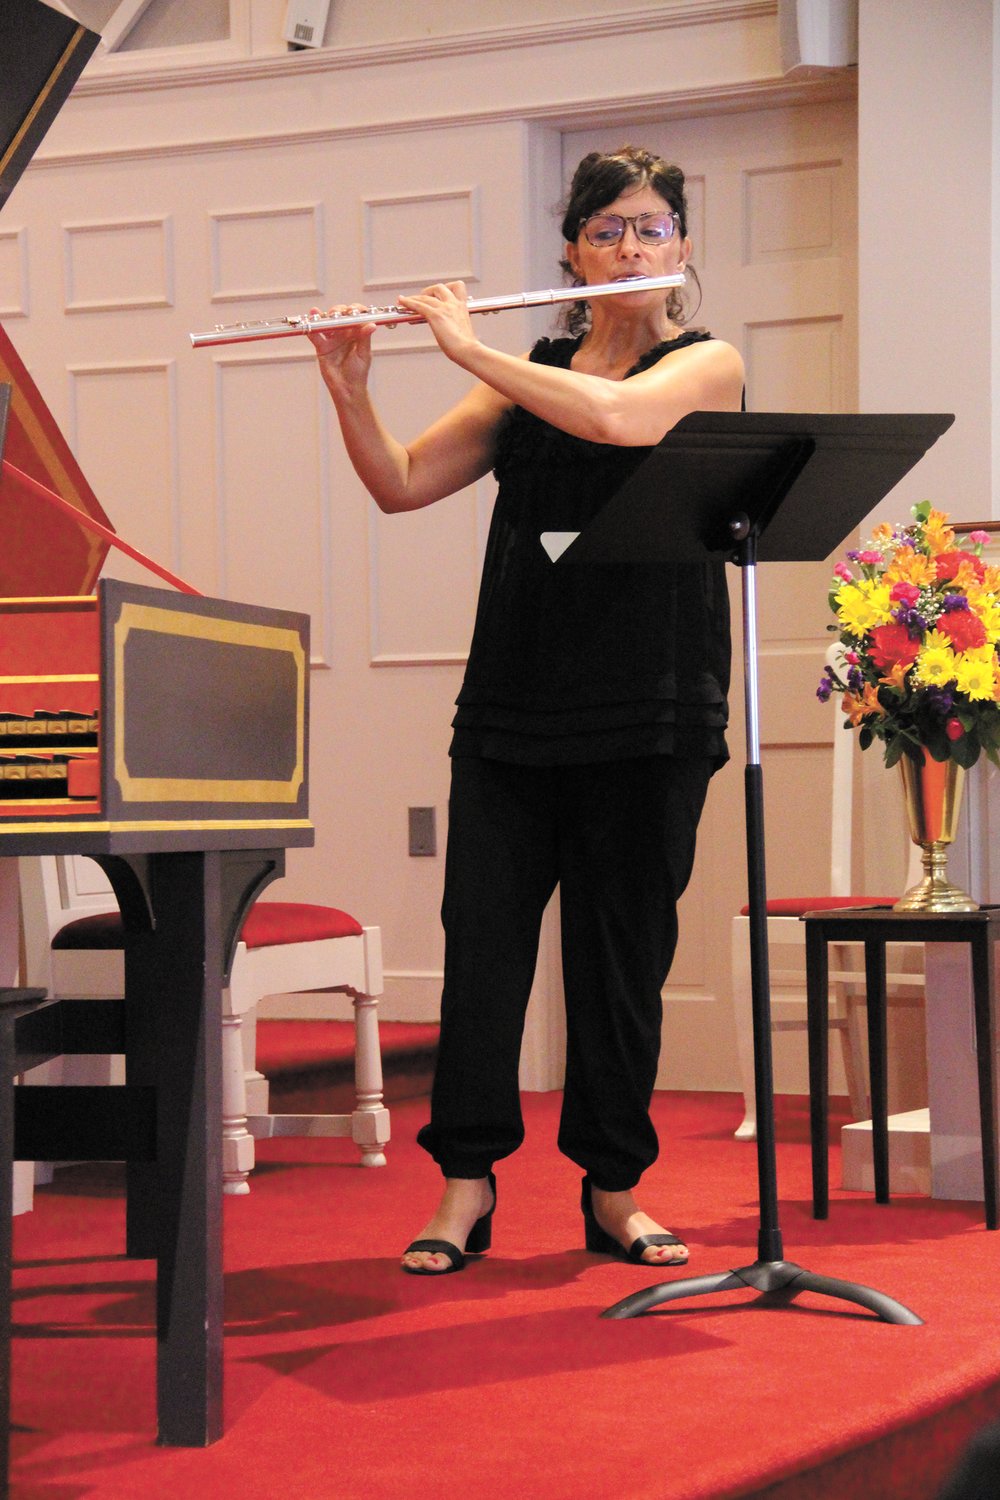 ON HER TOES: Dr. Mary Ellen Kregler, professor of music at RIC, was on her toes as she played the high notes to a Bach flute sonata.